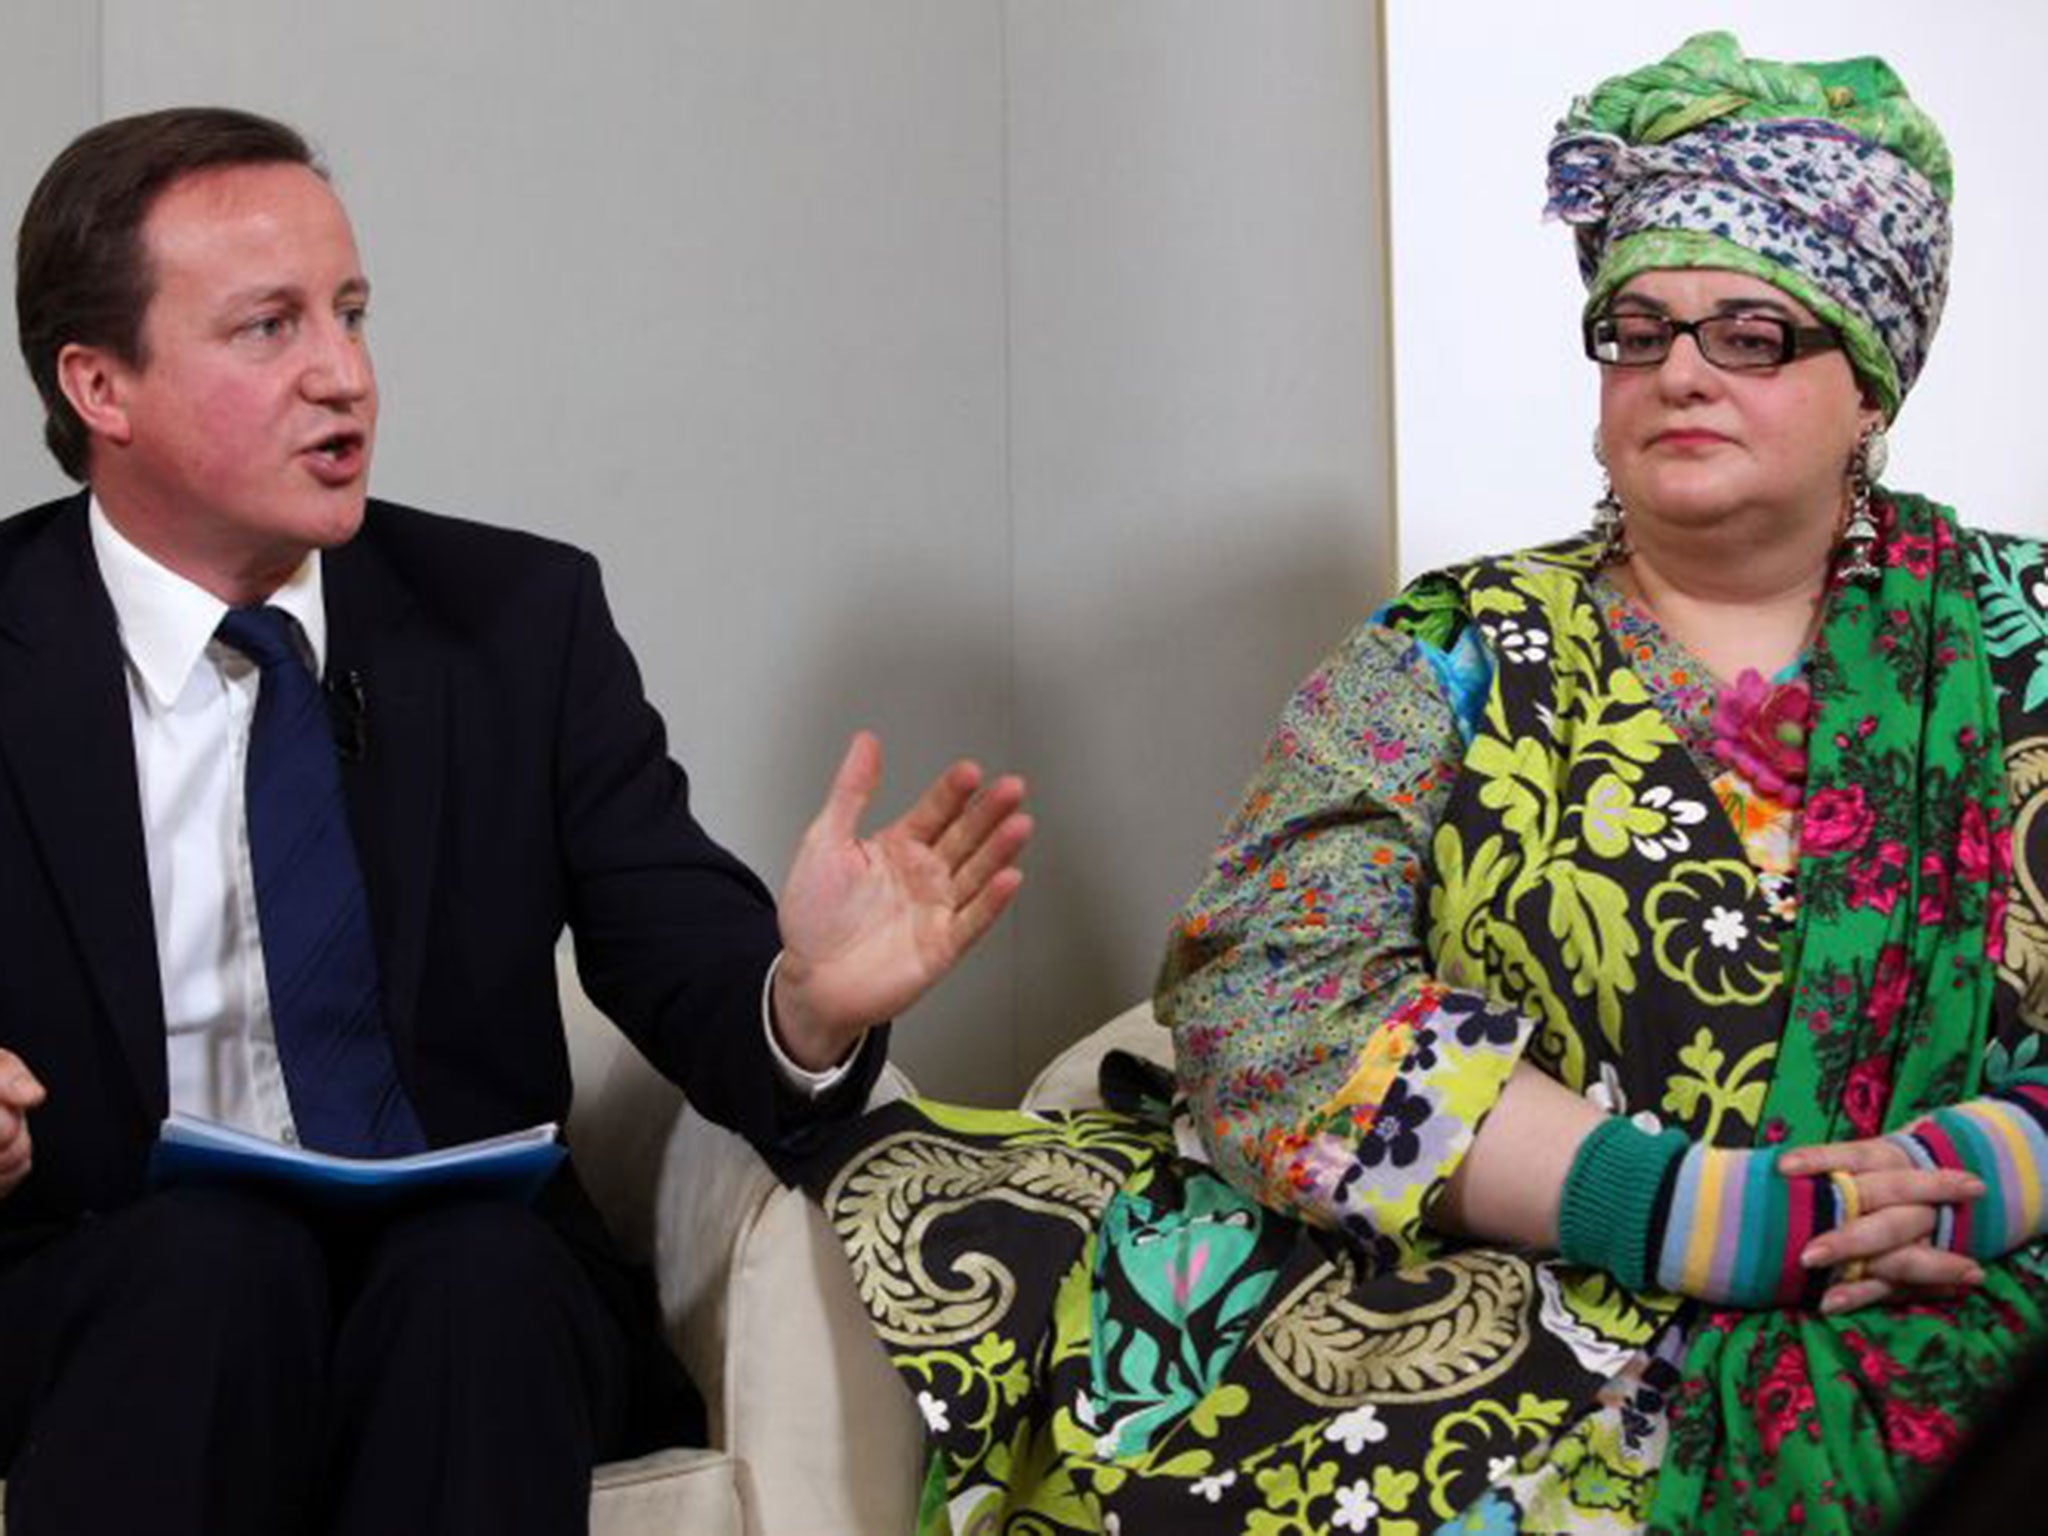 Conservative party leader David Cameron answers audience questions with Camila Batmanghelidjh, the founder of the charity 'Kids Company' (Getty)